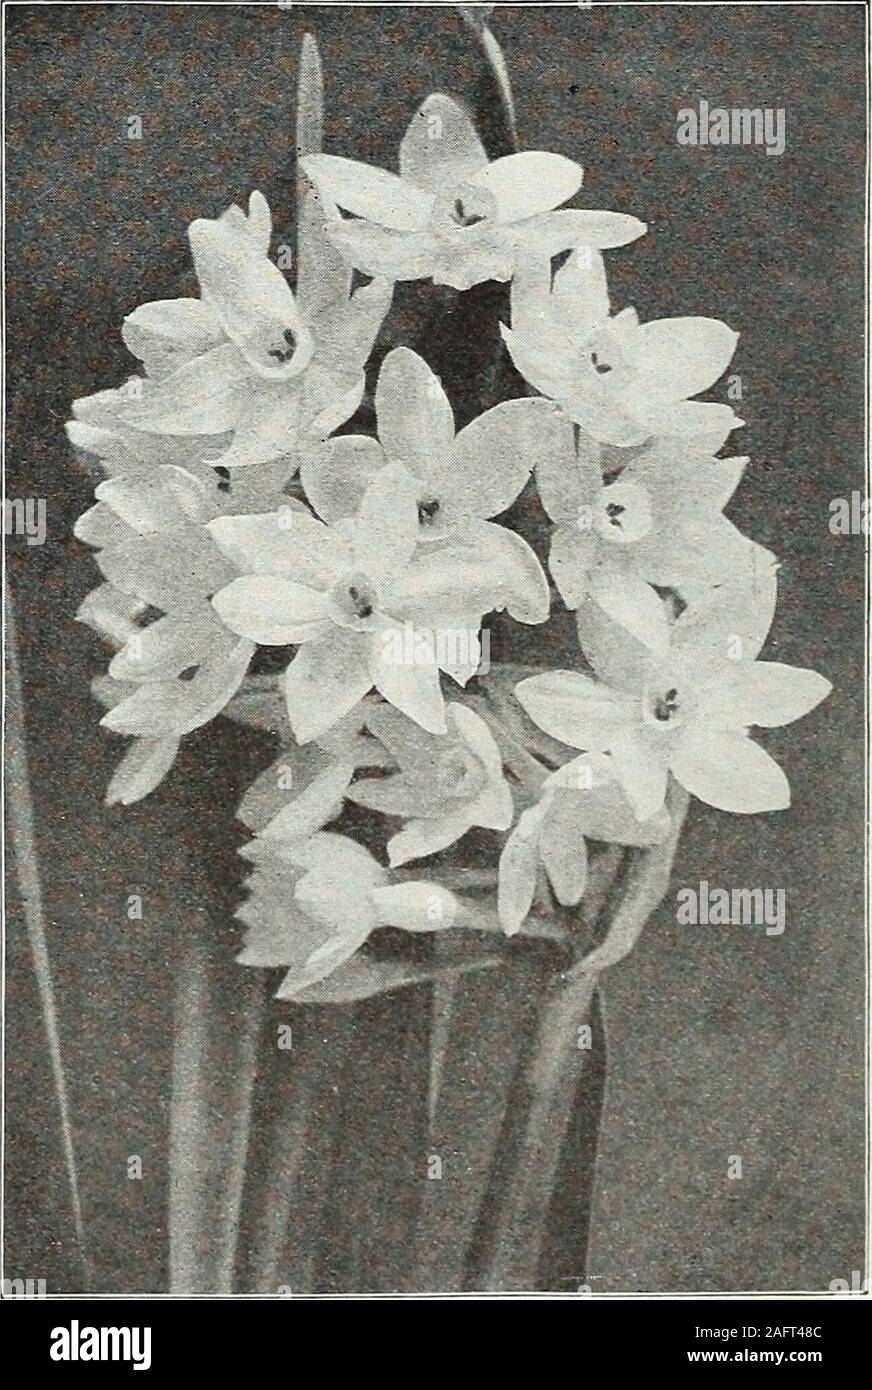 . Farquhar's autumn catalogue : 1921. le whiteflowers, with rich orange segments in the centre; very effec-tive and desirable for both forcing and outdoor planting Sulphur or Silver Phoenix. (Codlins and Cream.) One ofthe finest double sorts, with large pale creamy white fragrantflowers; excellent for pot culture Doz. SI. 00.85 .60 .85 .90 100 1,000 S8.00 S78.006.00 58.00 4.25 40.00 6.00 6.50 .85 6.00 NARCISSUS JONQUILLA OR JONQUILS. The delicately graceful forms, delicious fragrance and deep yellow color of theirblossoms have made the Jonquils favorites. Plant six or eight bulbs in a six-inch Stock Photo